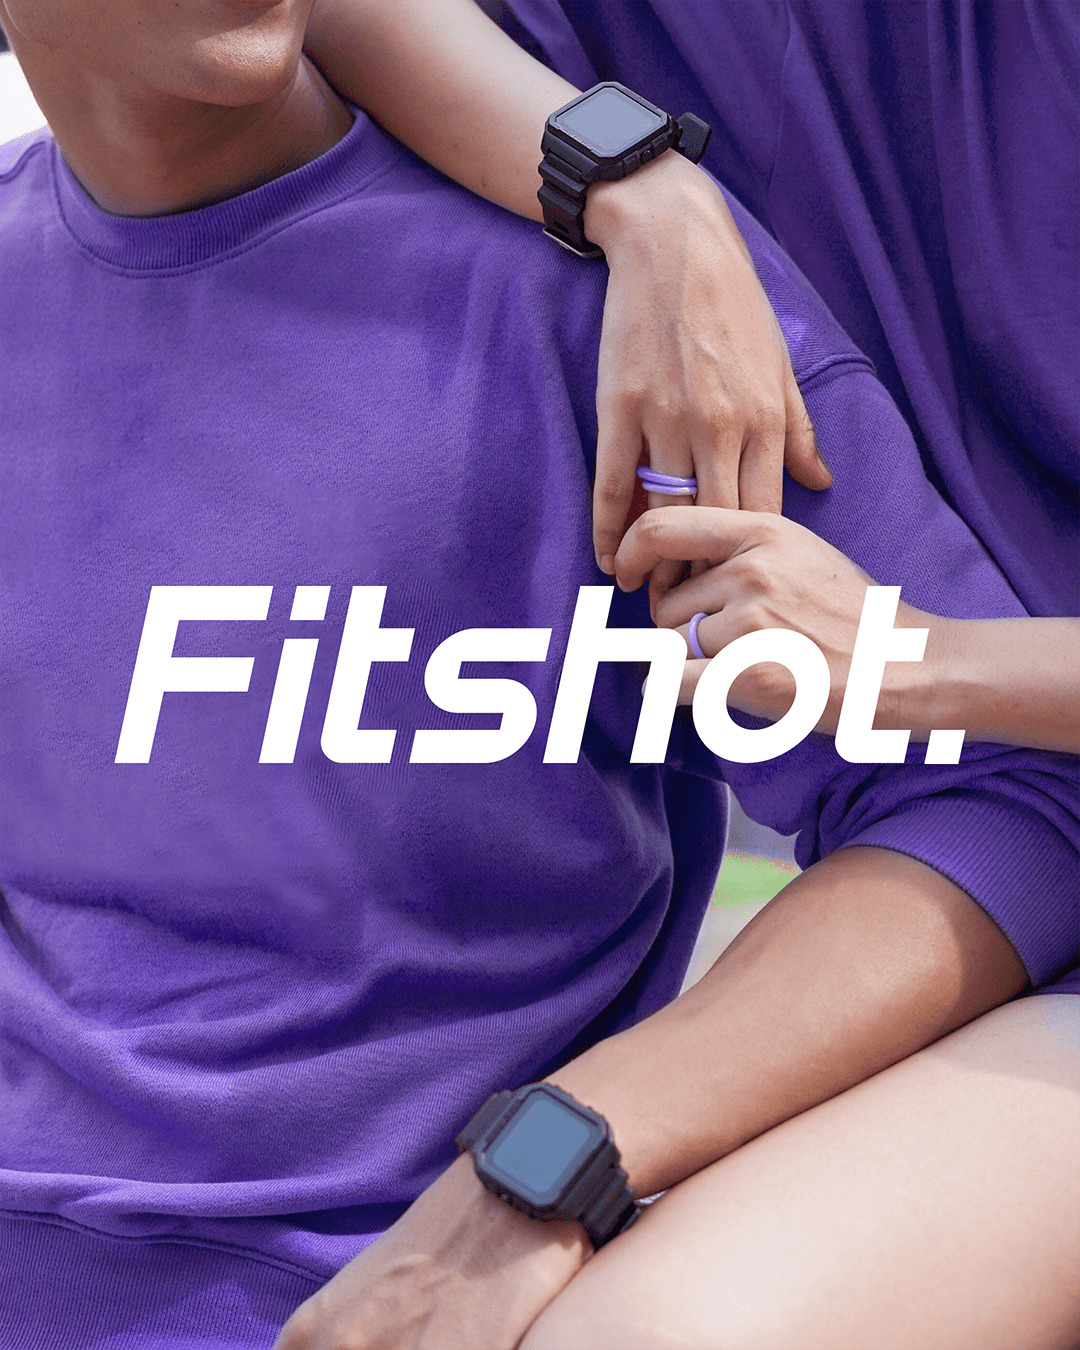 Brand Identity and System Design for Fitshot